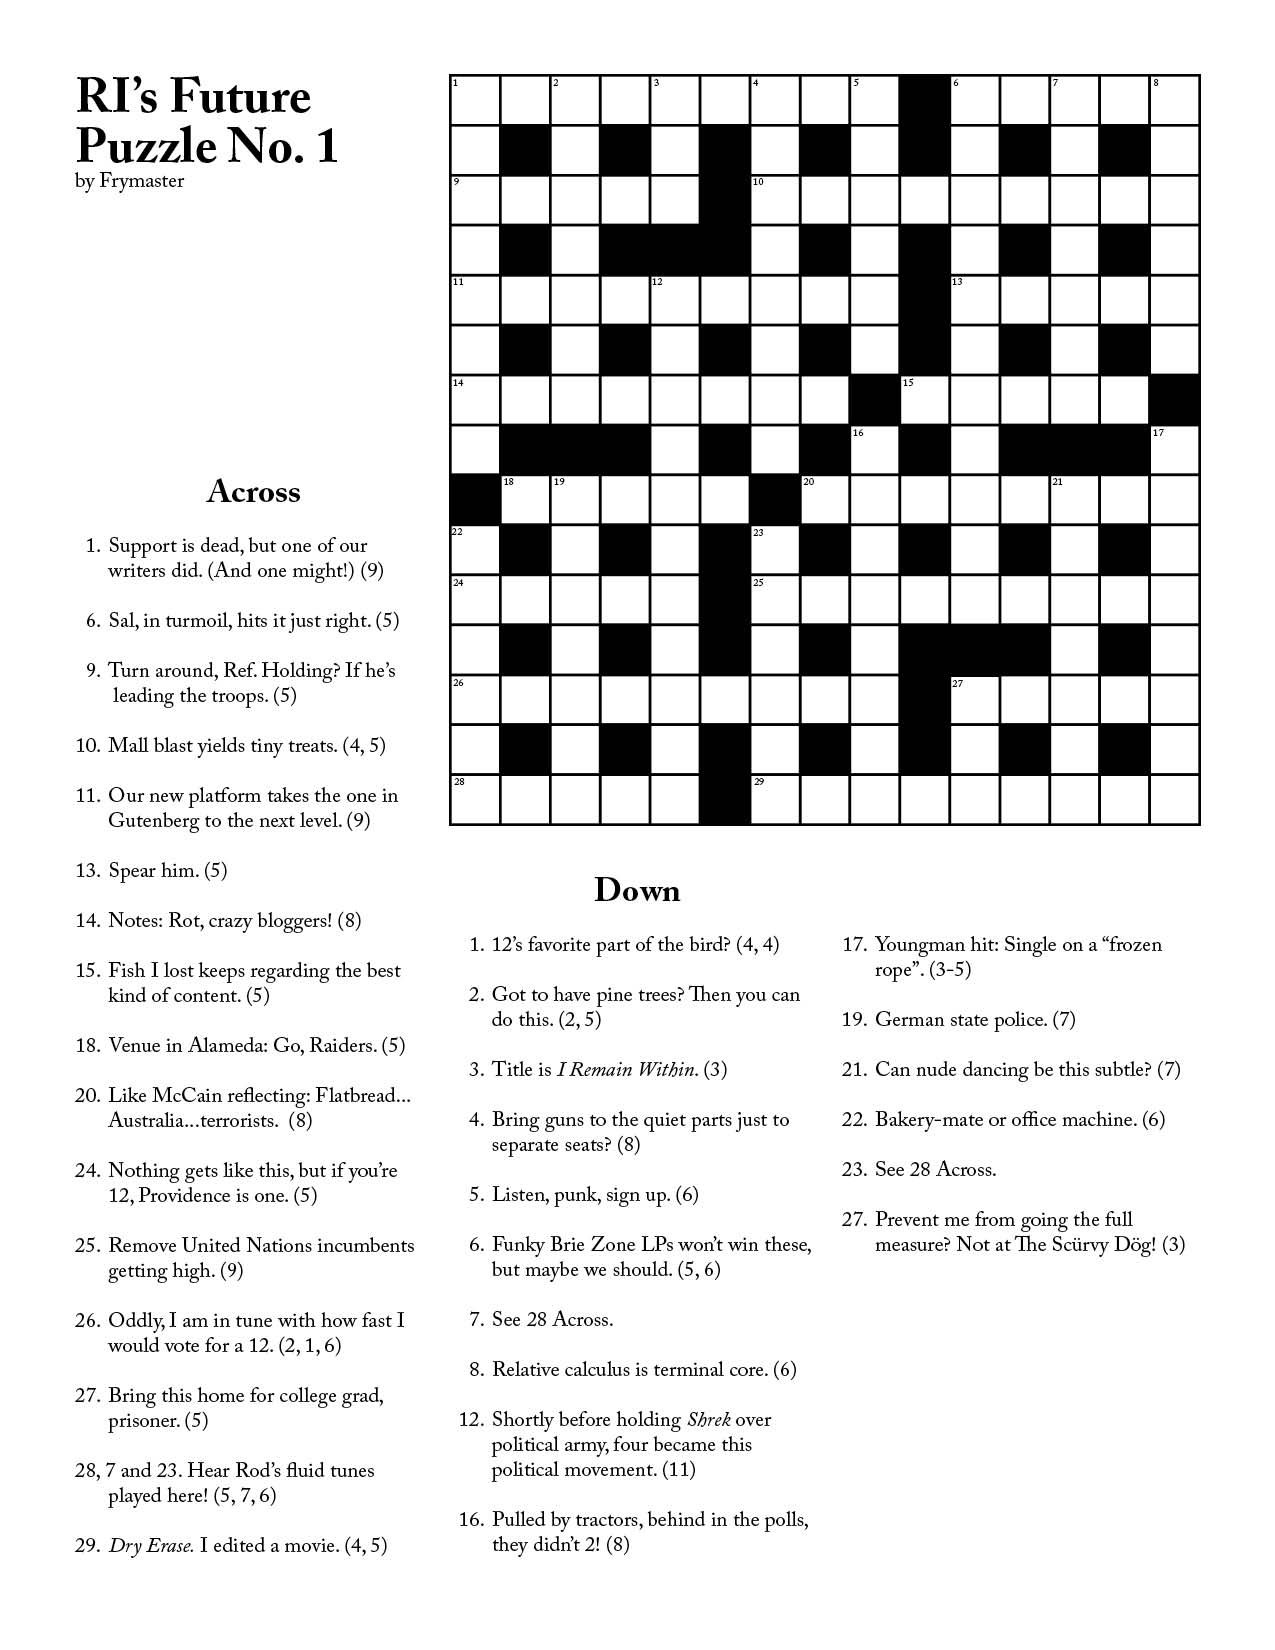 Daily Cryptic Crossword Printable